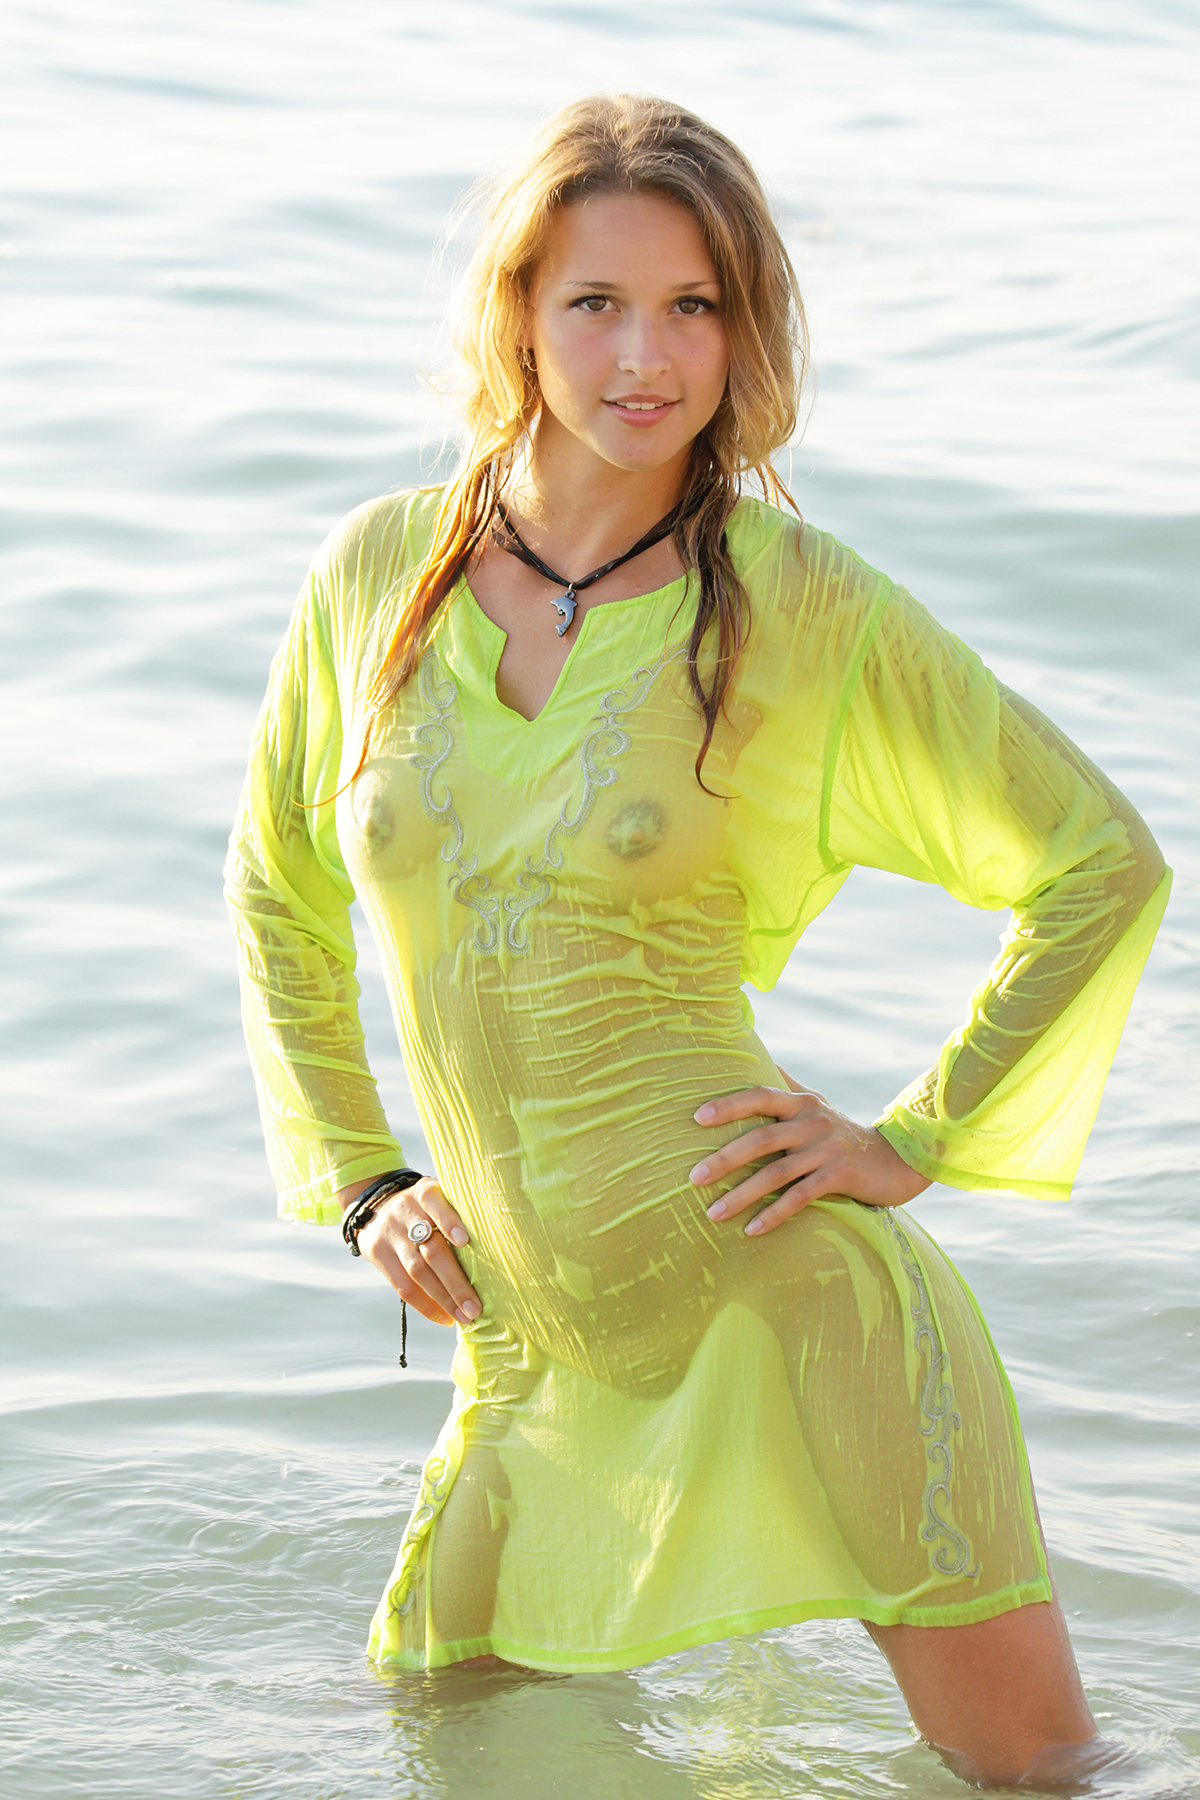 Sexy Skinny Teen Toxic A on the Beach by Angela Linin for Metart - Pic #2